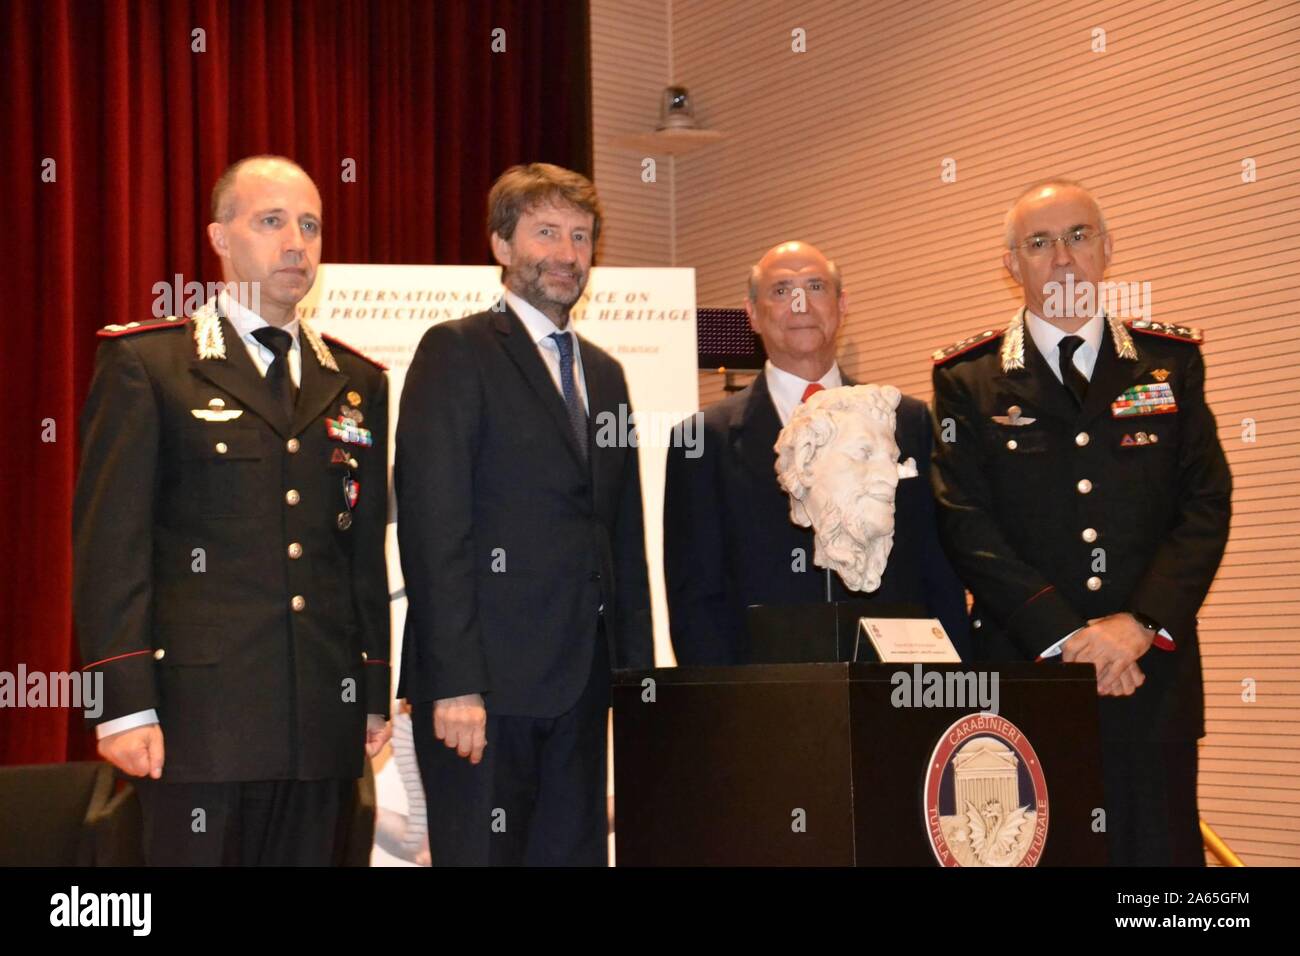 Ceremony this morning at the Carabinieri Officers' School for the ...